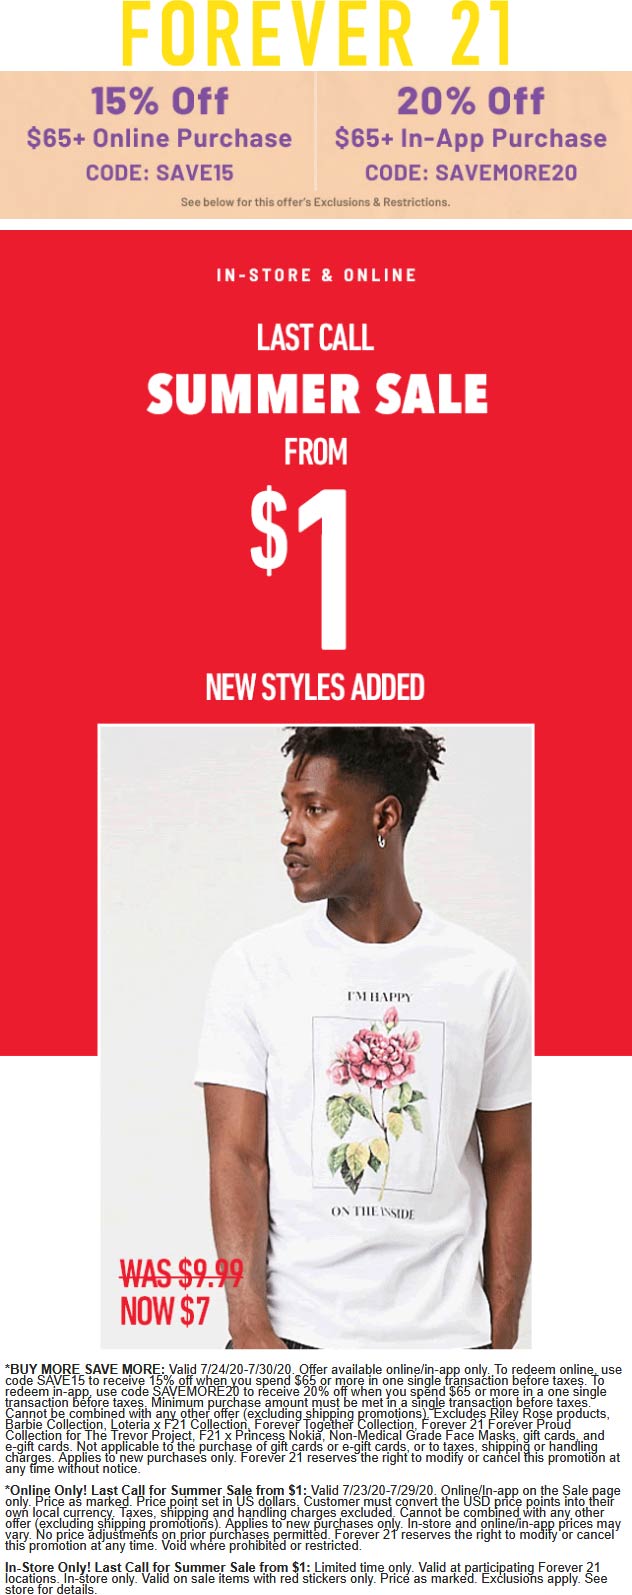 1520 off 65+ at Forever 21 via promo code SAVE15 or SAVEMORE20 